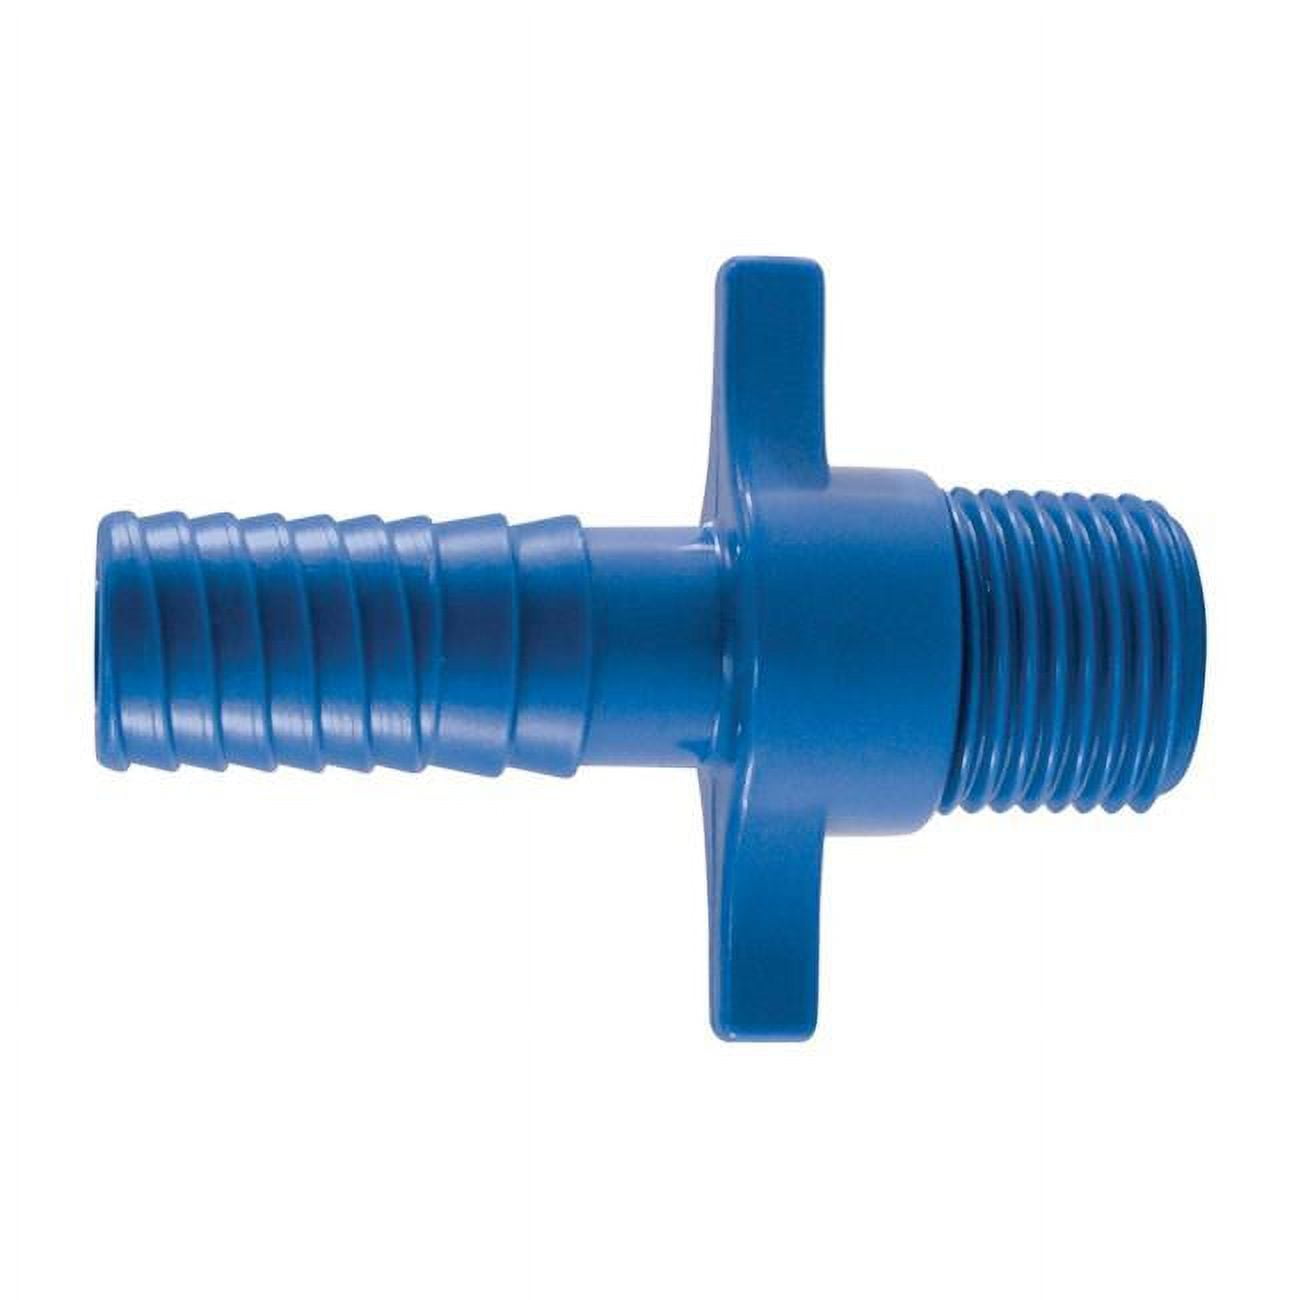 4814794 0.5 In. Insert X 0.5 In. Dia. Mpt Polypropylene Male Adapter, Blue - Pack Of 5